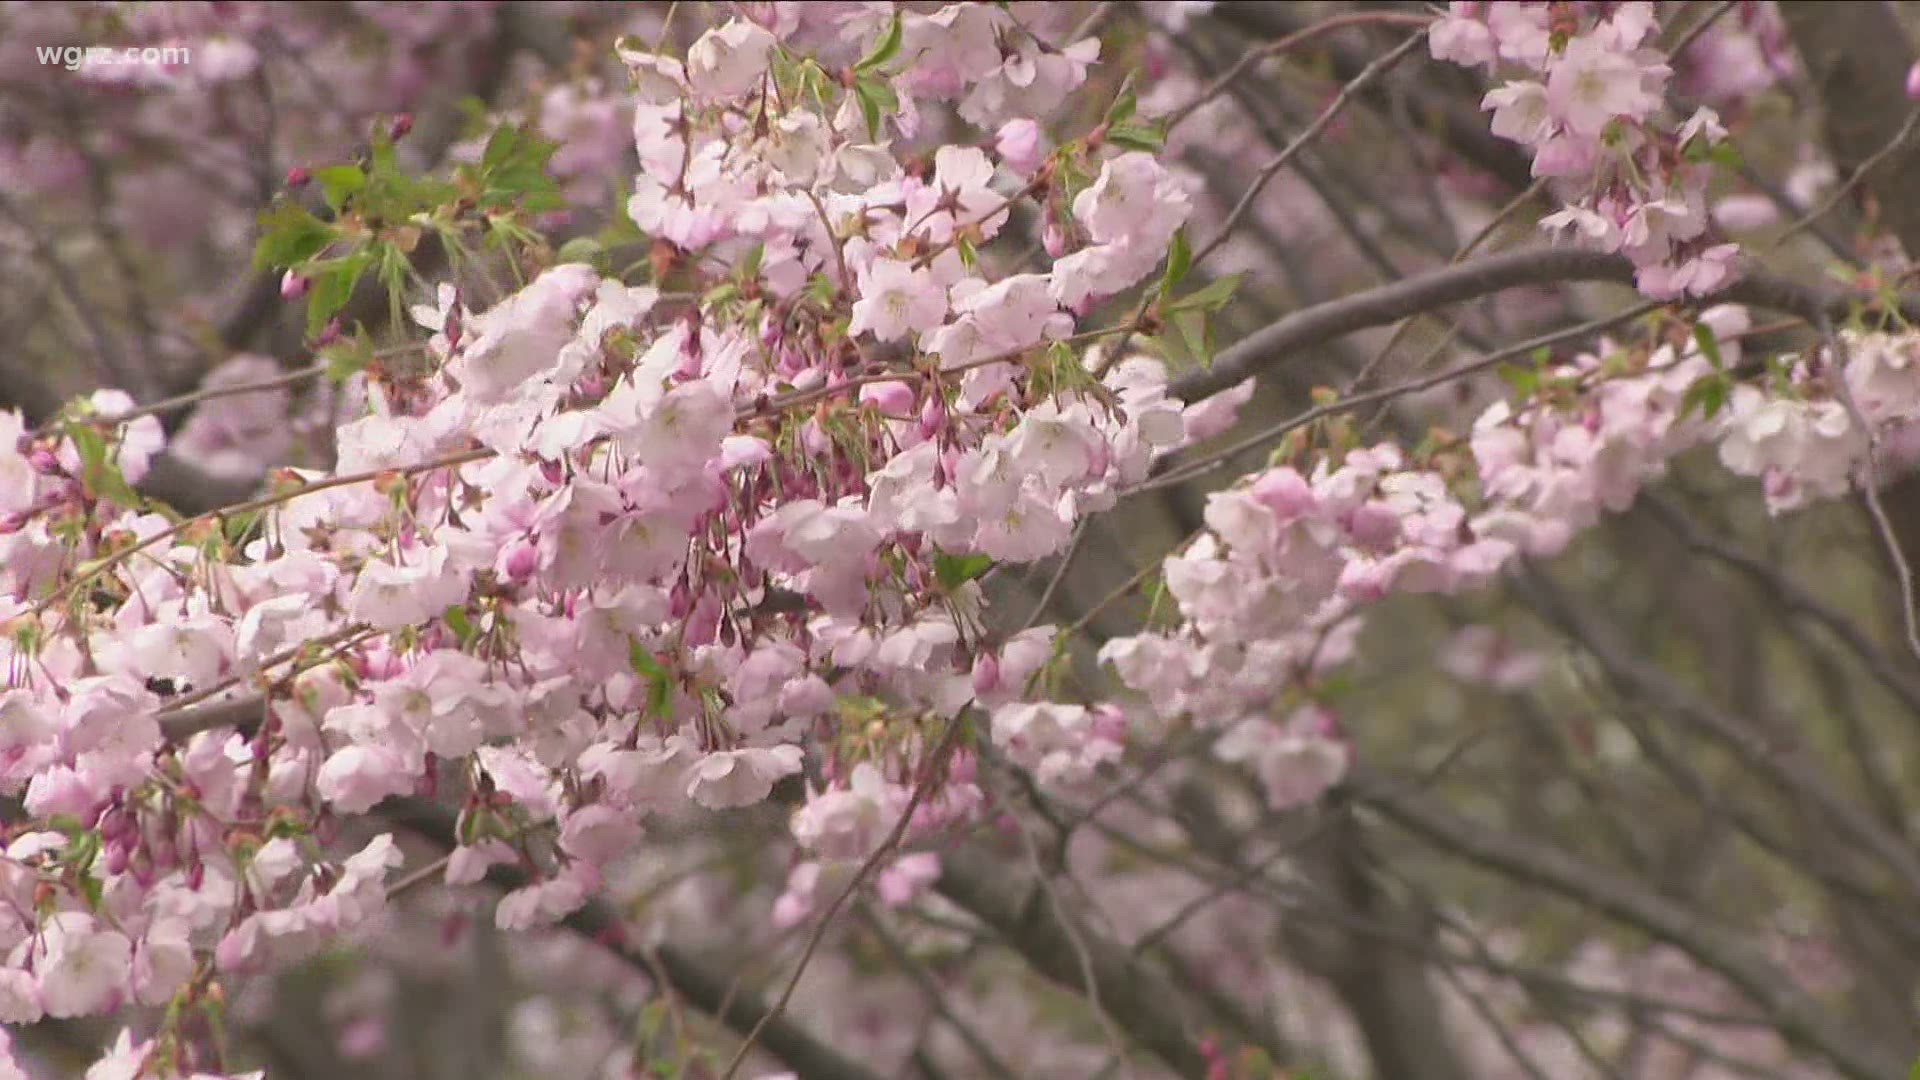 Buffalonians didn't always check out the cherry blossoms when they bloom.  This year blooms came earlier, attributed to more recent sunshine and warmer weather.